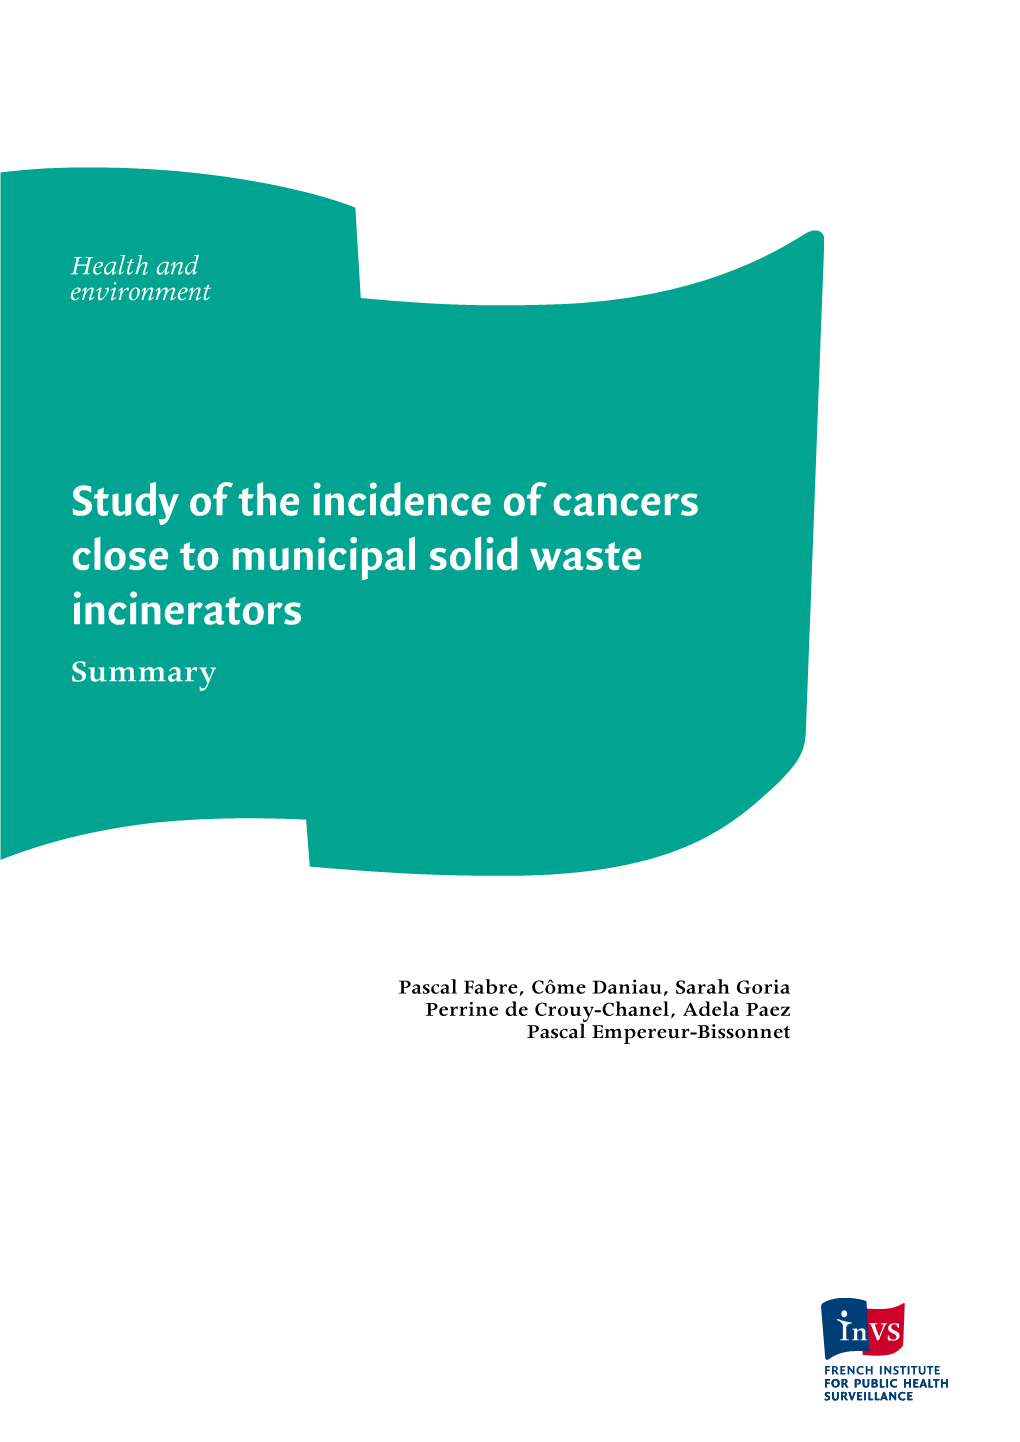 Study of the Incidence of Cancers Close to Municipal Solid Waste Incinerators Summary